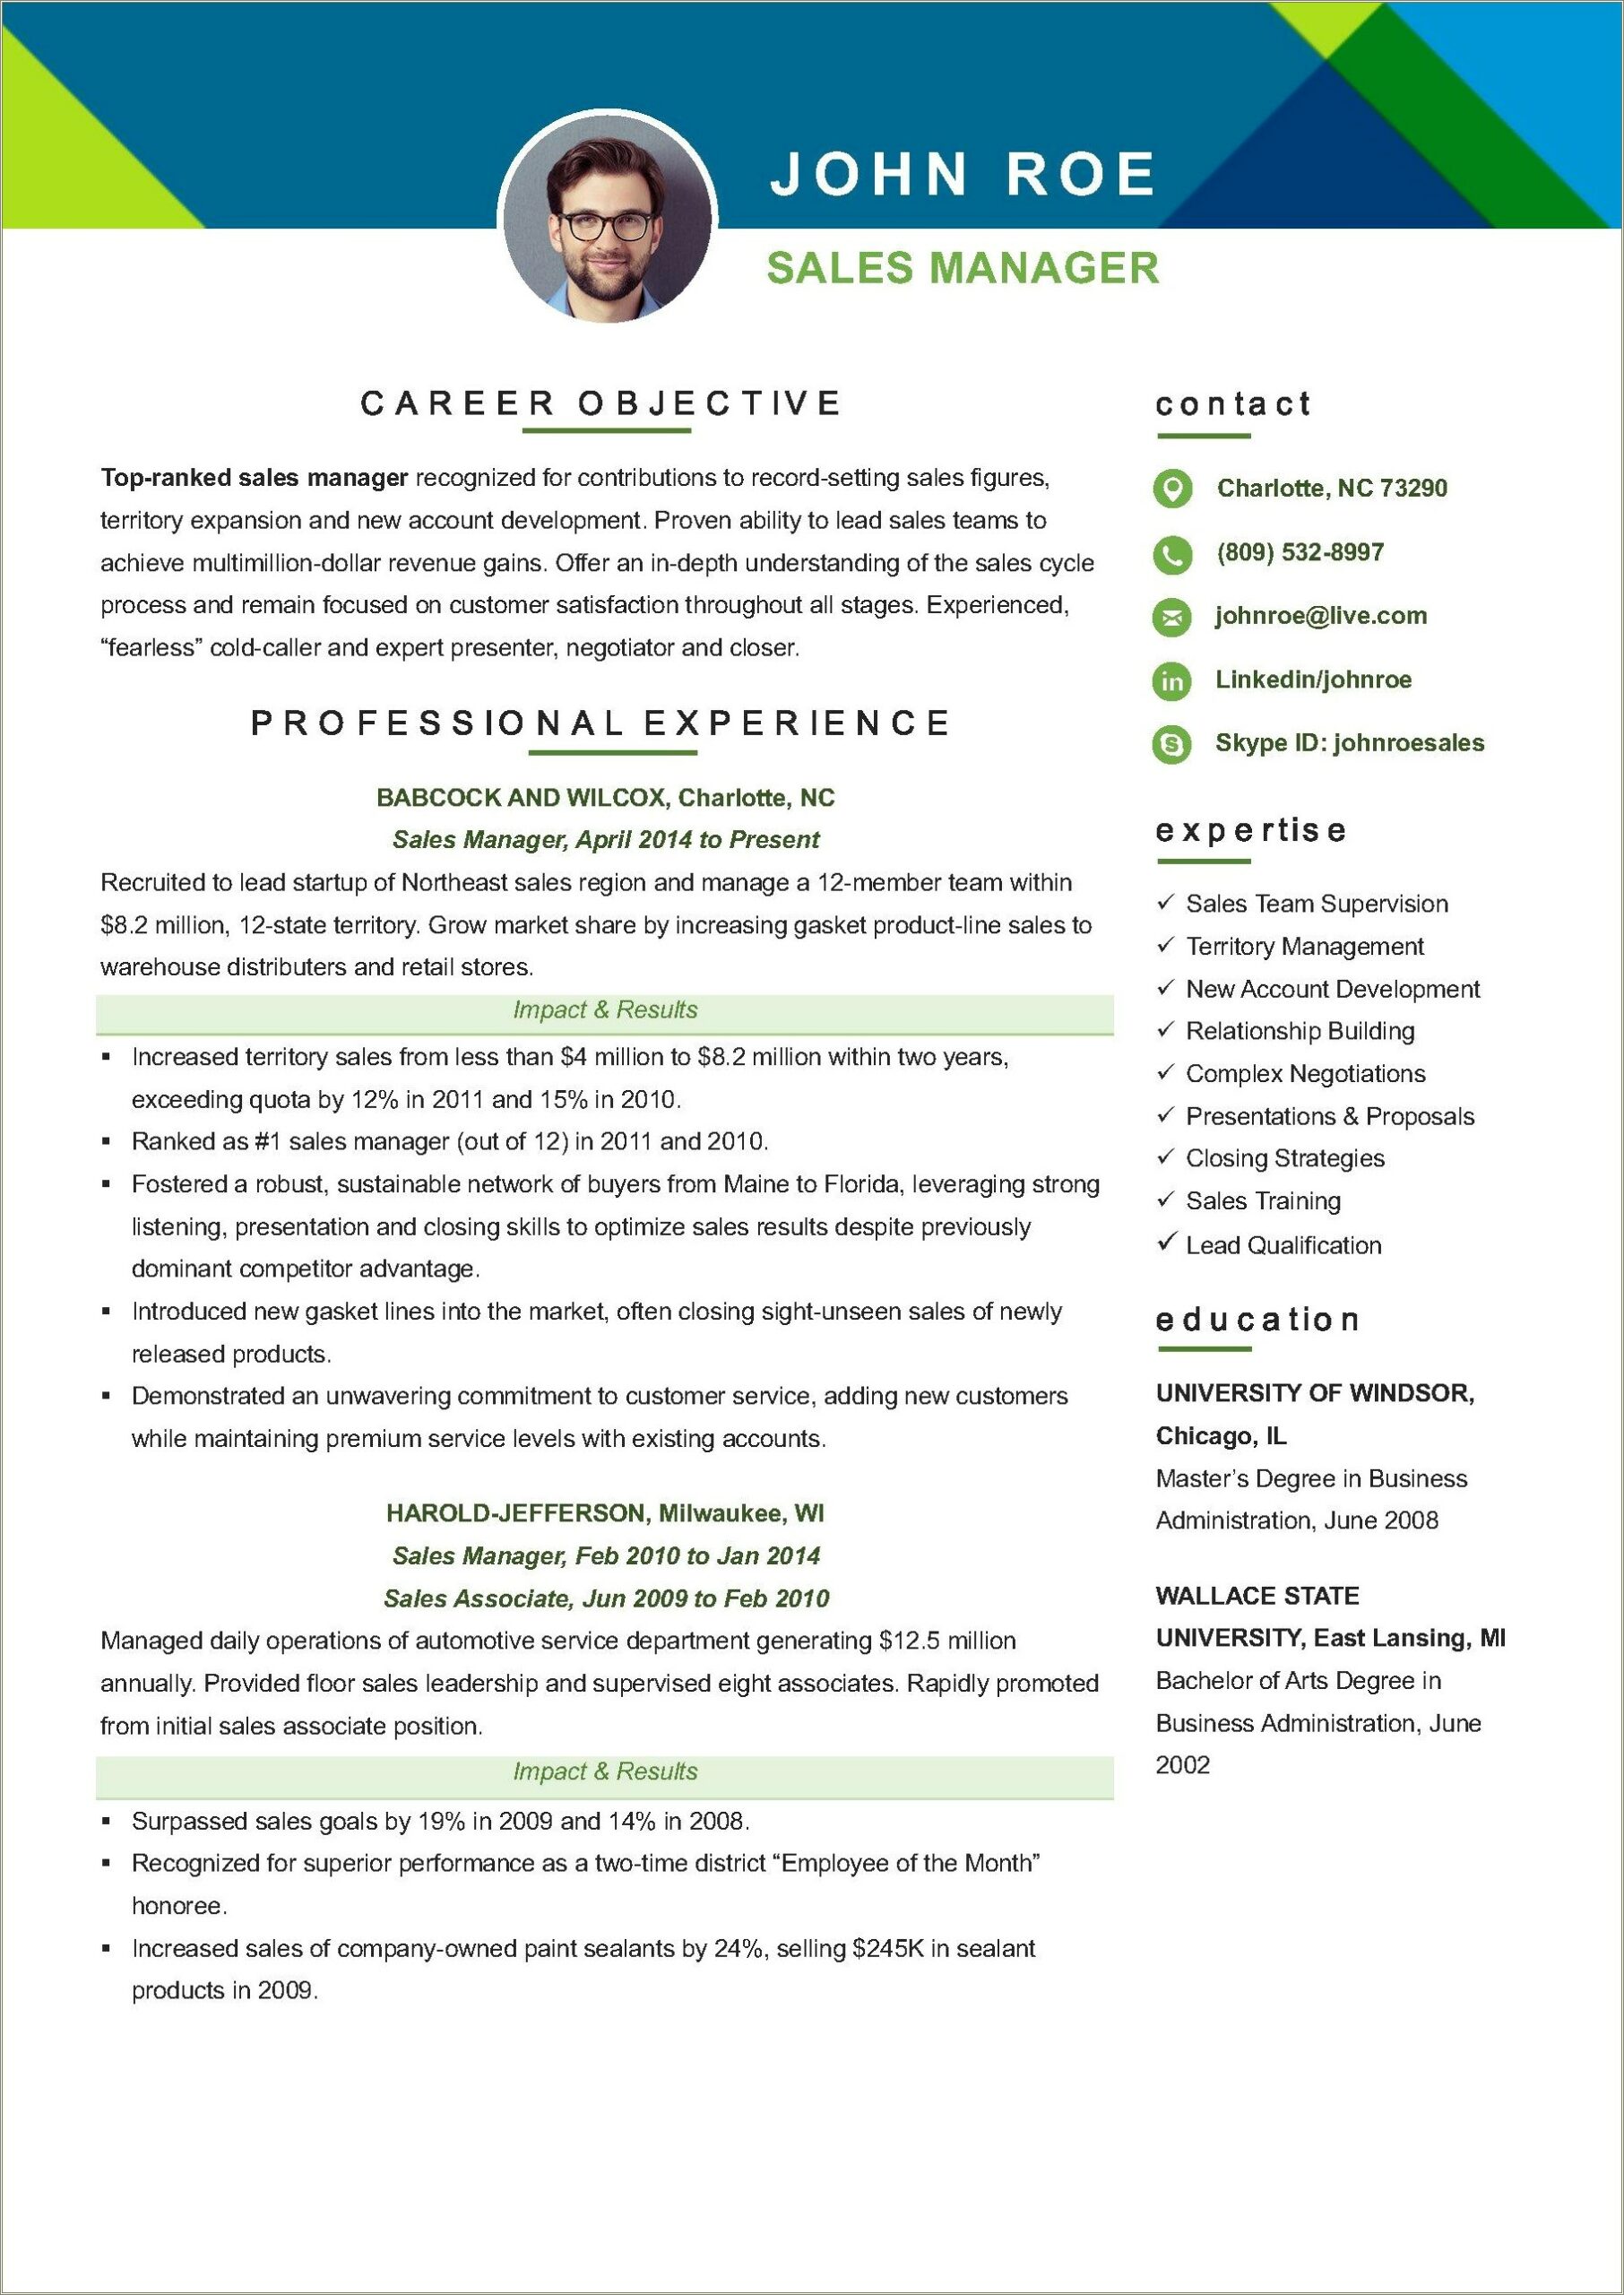 Objectvie For A Regional Sales Manager On Resume